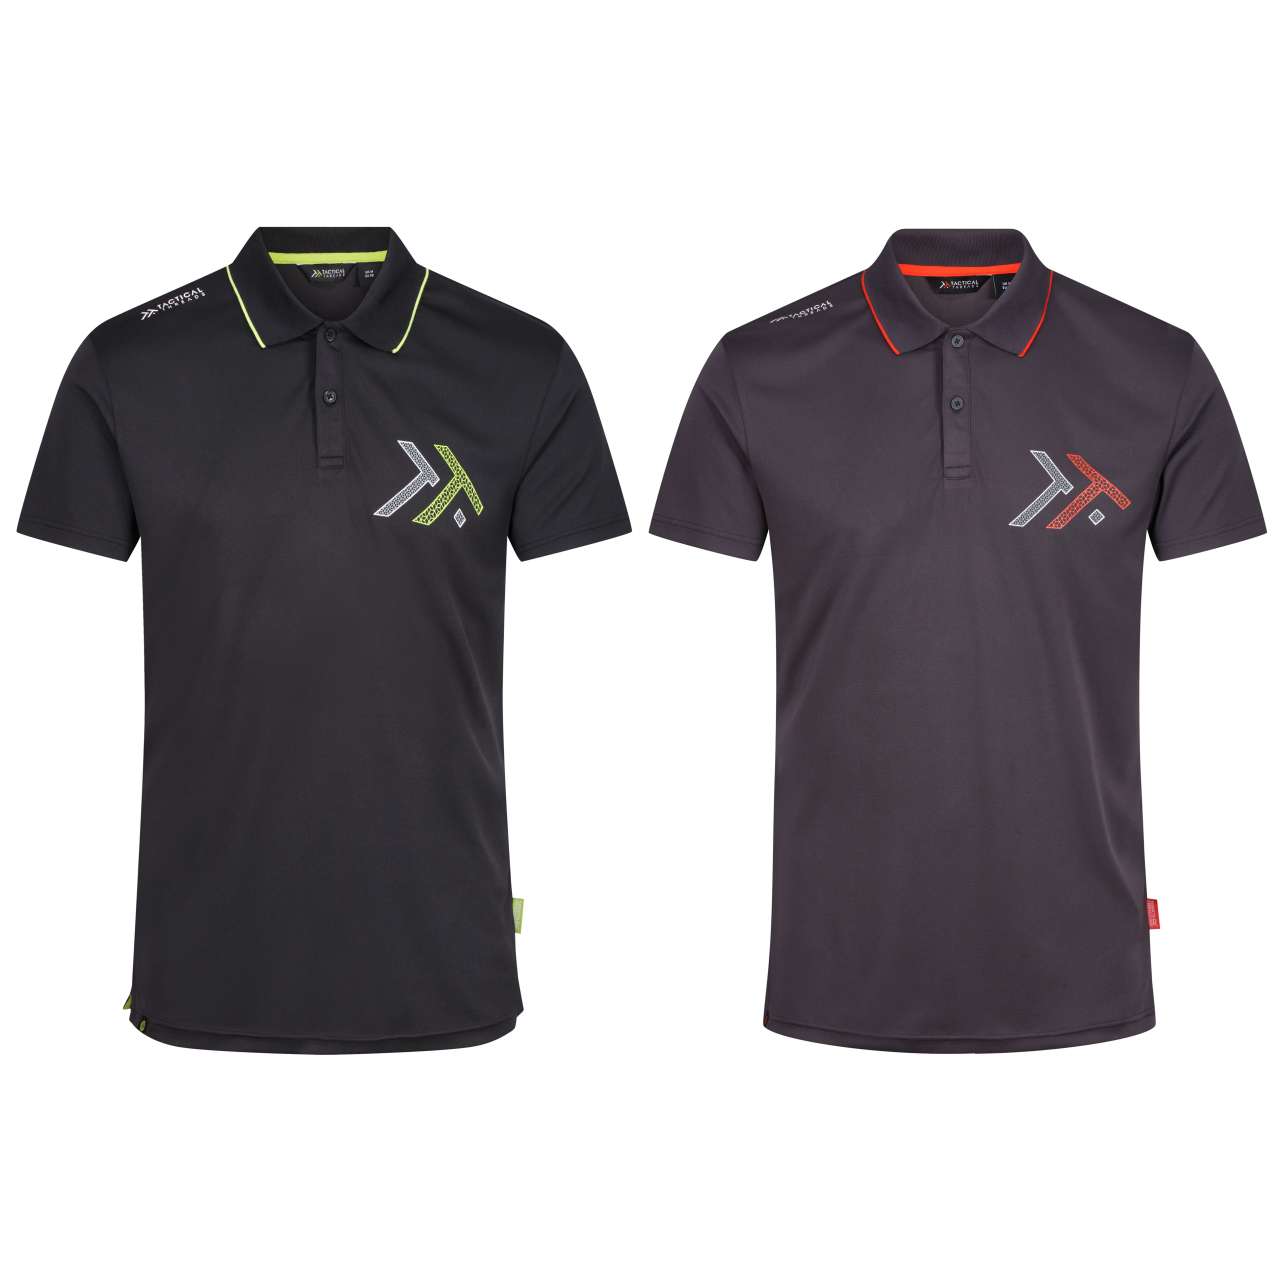 2 PACK OF POLO SHIRTS